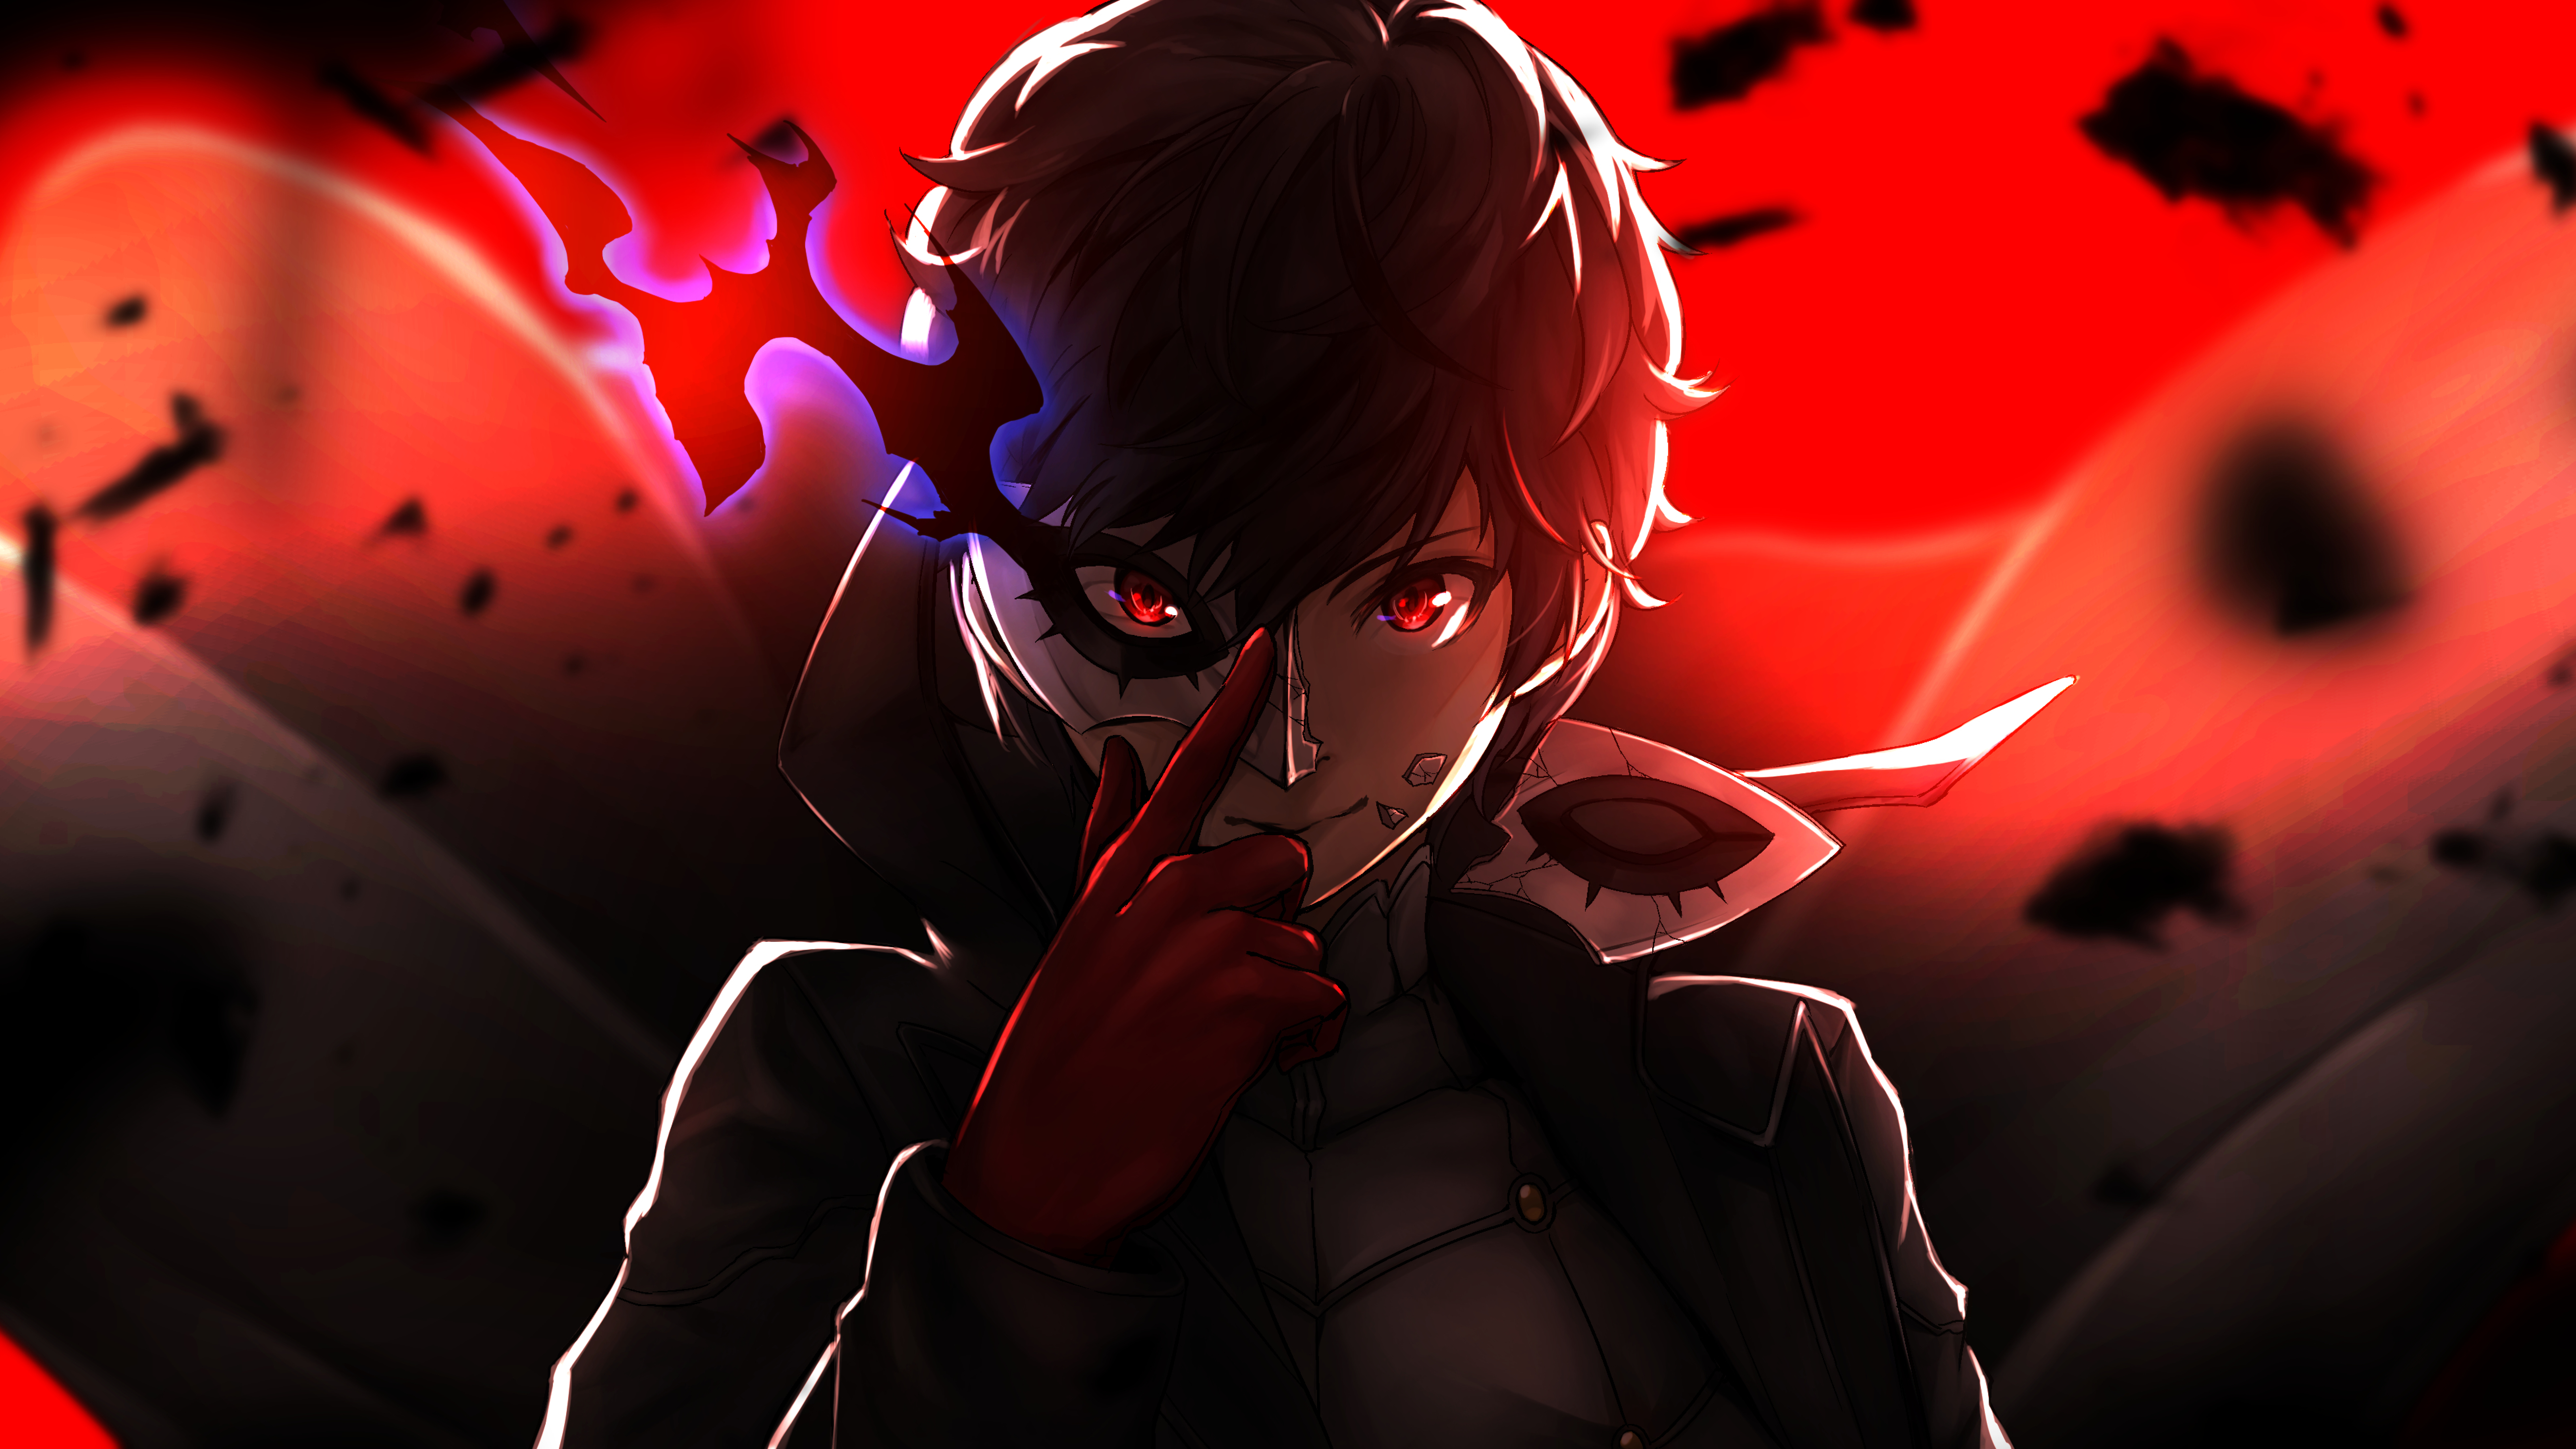 7680x43 Protagoinst Persona 5 8k Wallpaper Hd Anime 4k Wallpapers Images Photos And Background Wallpapers Den